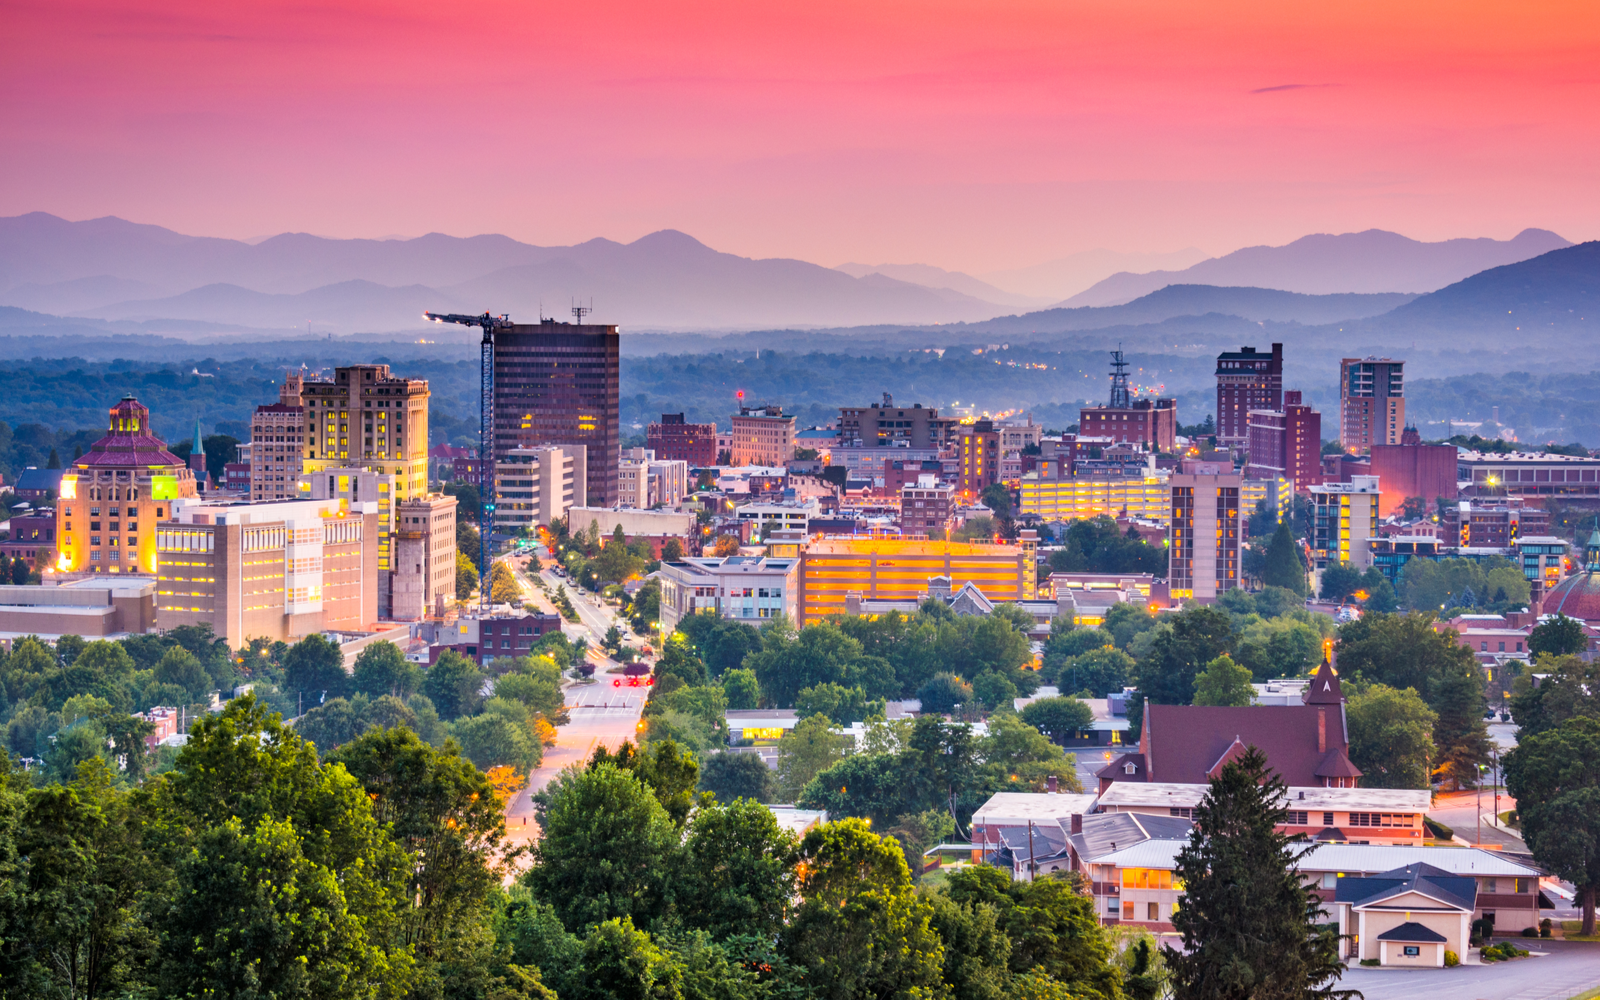 15 Best Things to Do in Asheville, NC in 2023